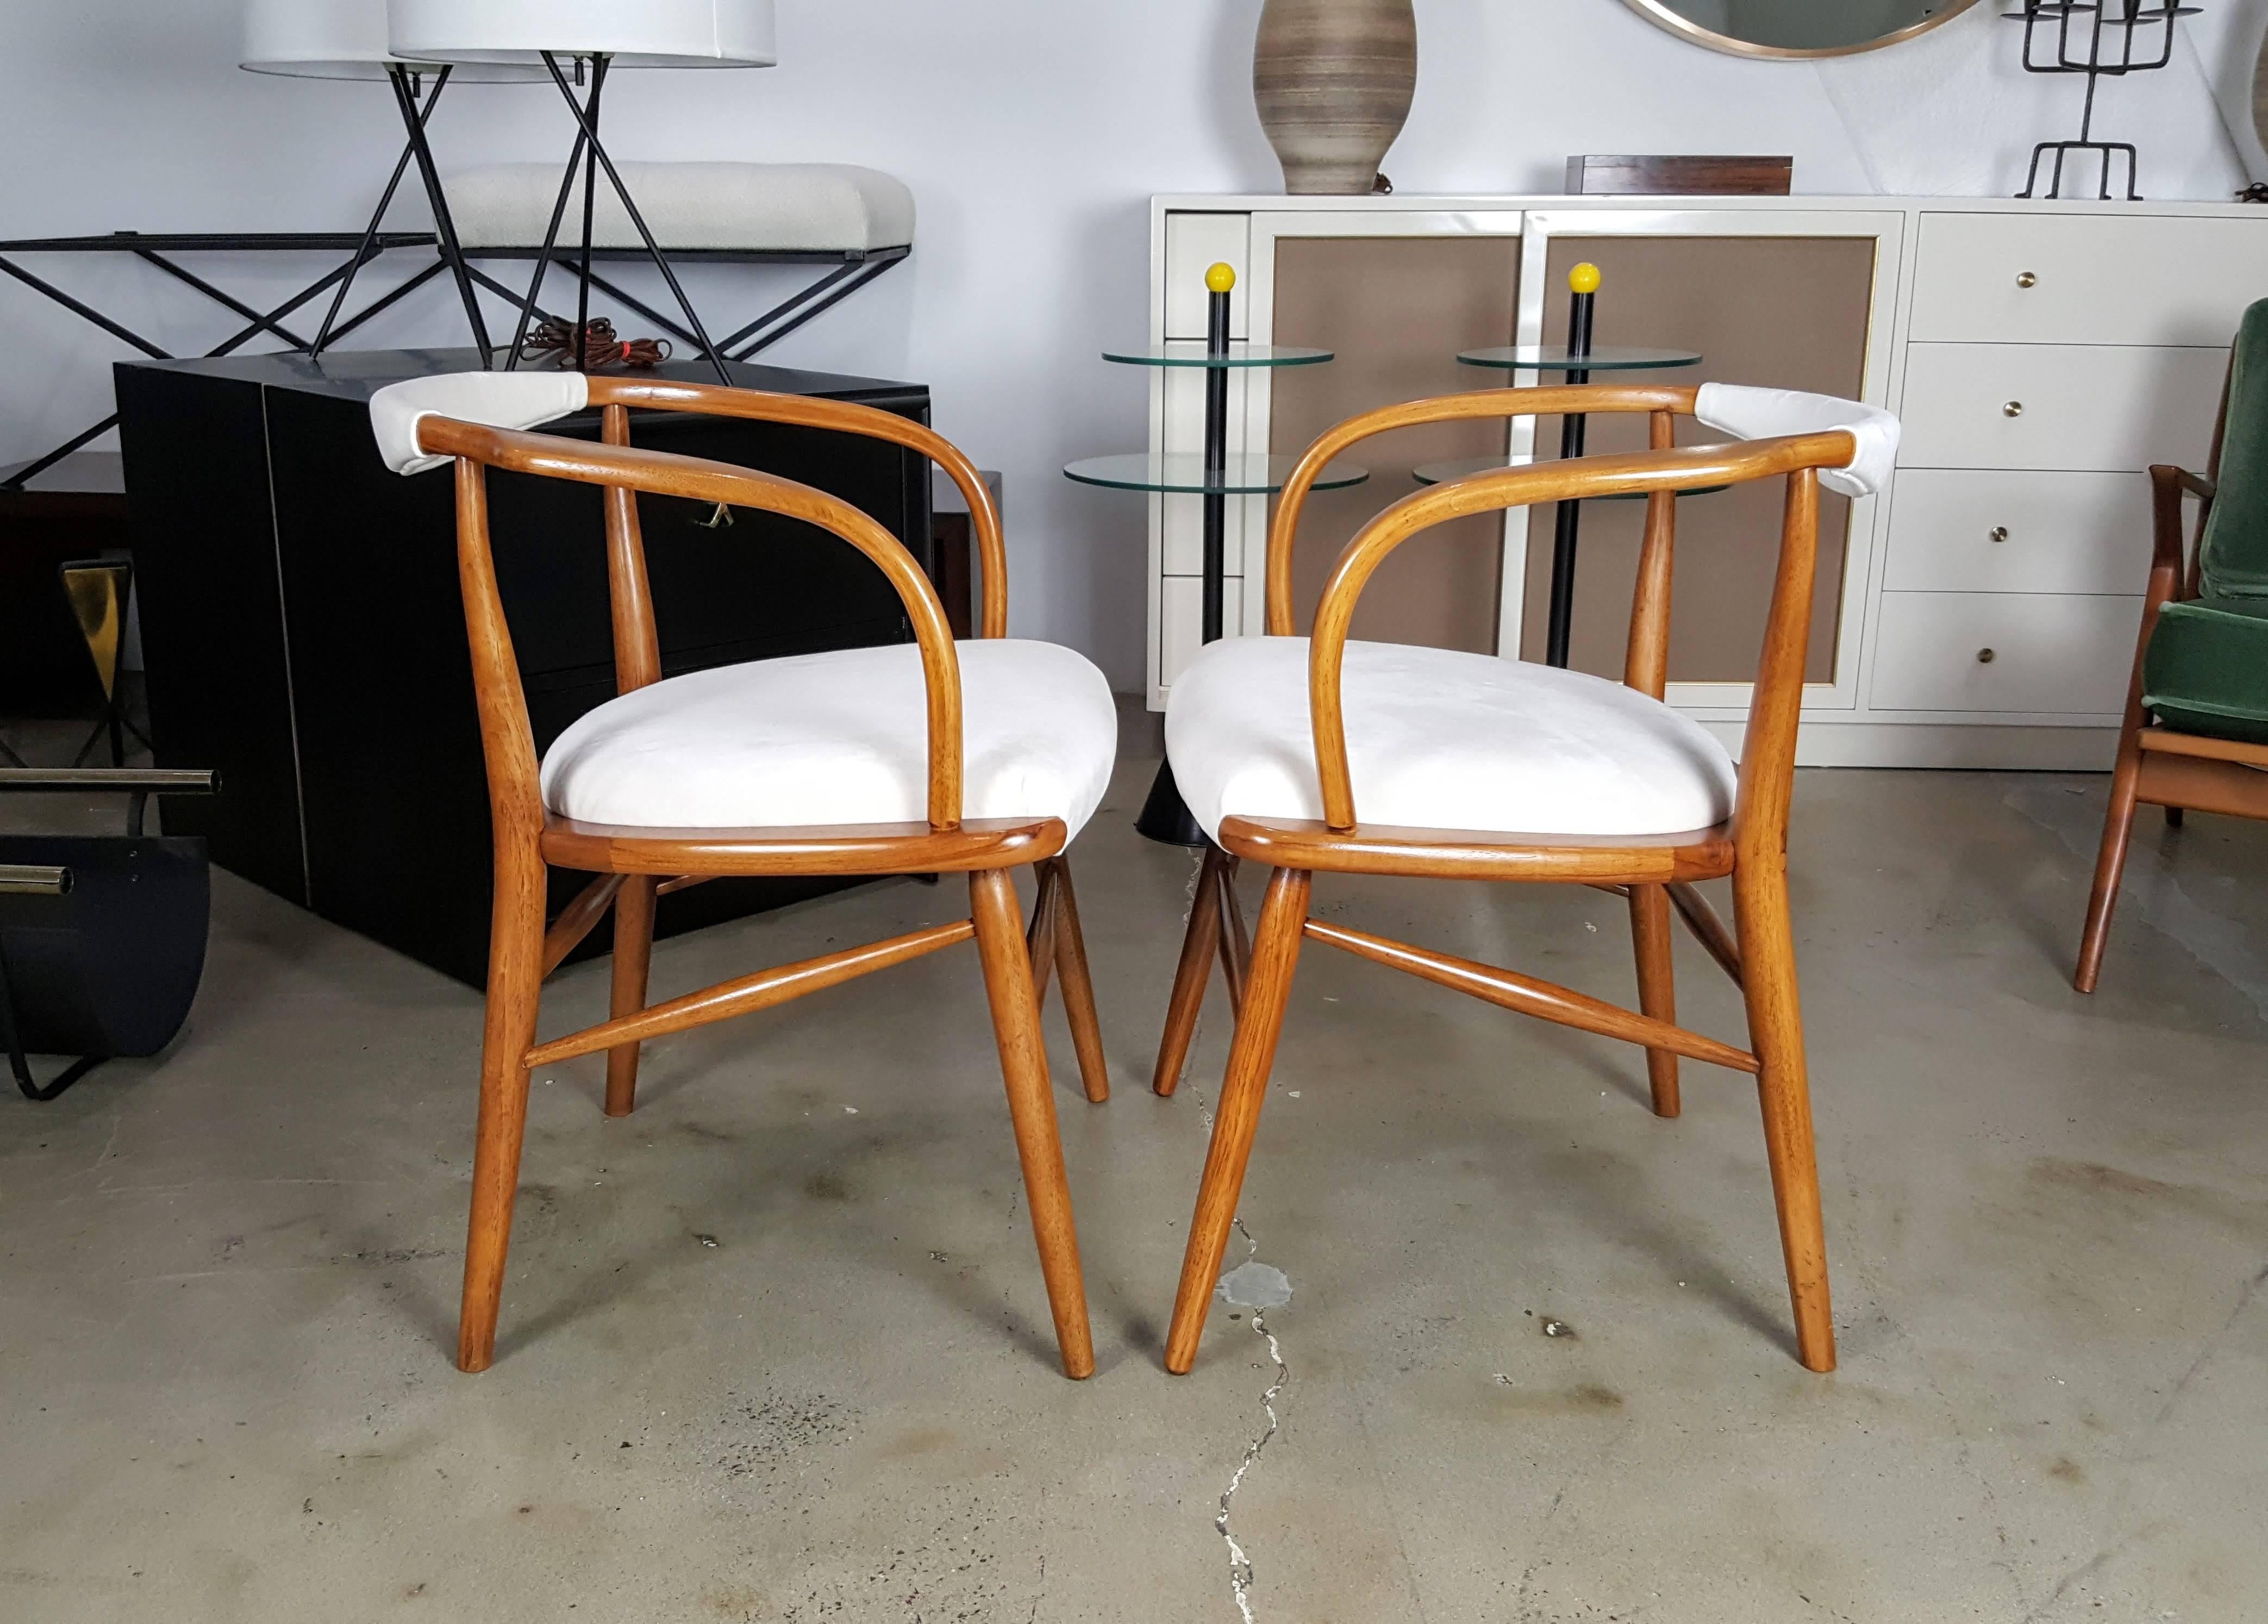 Pair of sculptural Danish Modern armchairs. Excellent design and craftsmanship. Fully restored. 

See this item in our private NYC showroom! Refine Limited is located in the heart of Chelsea at the history Starrett-LeHigh Building, 601 West 26th